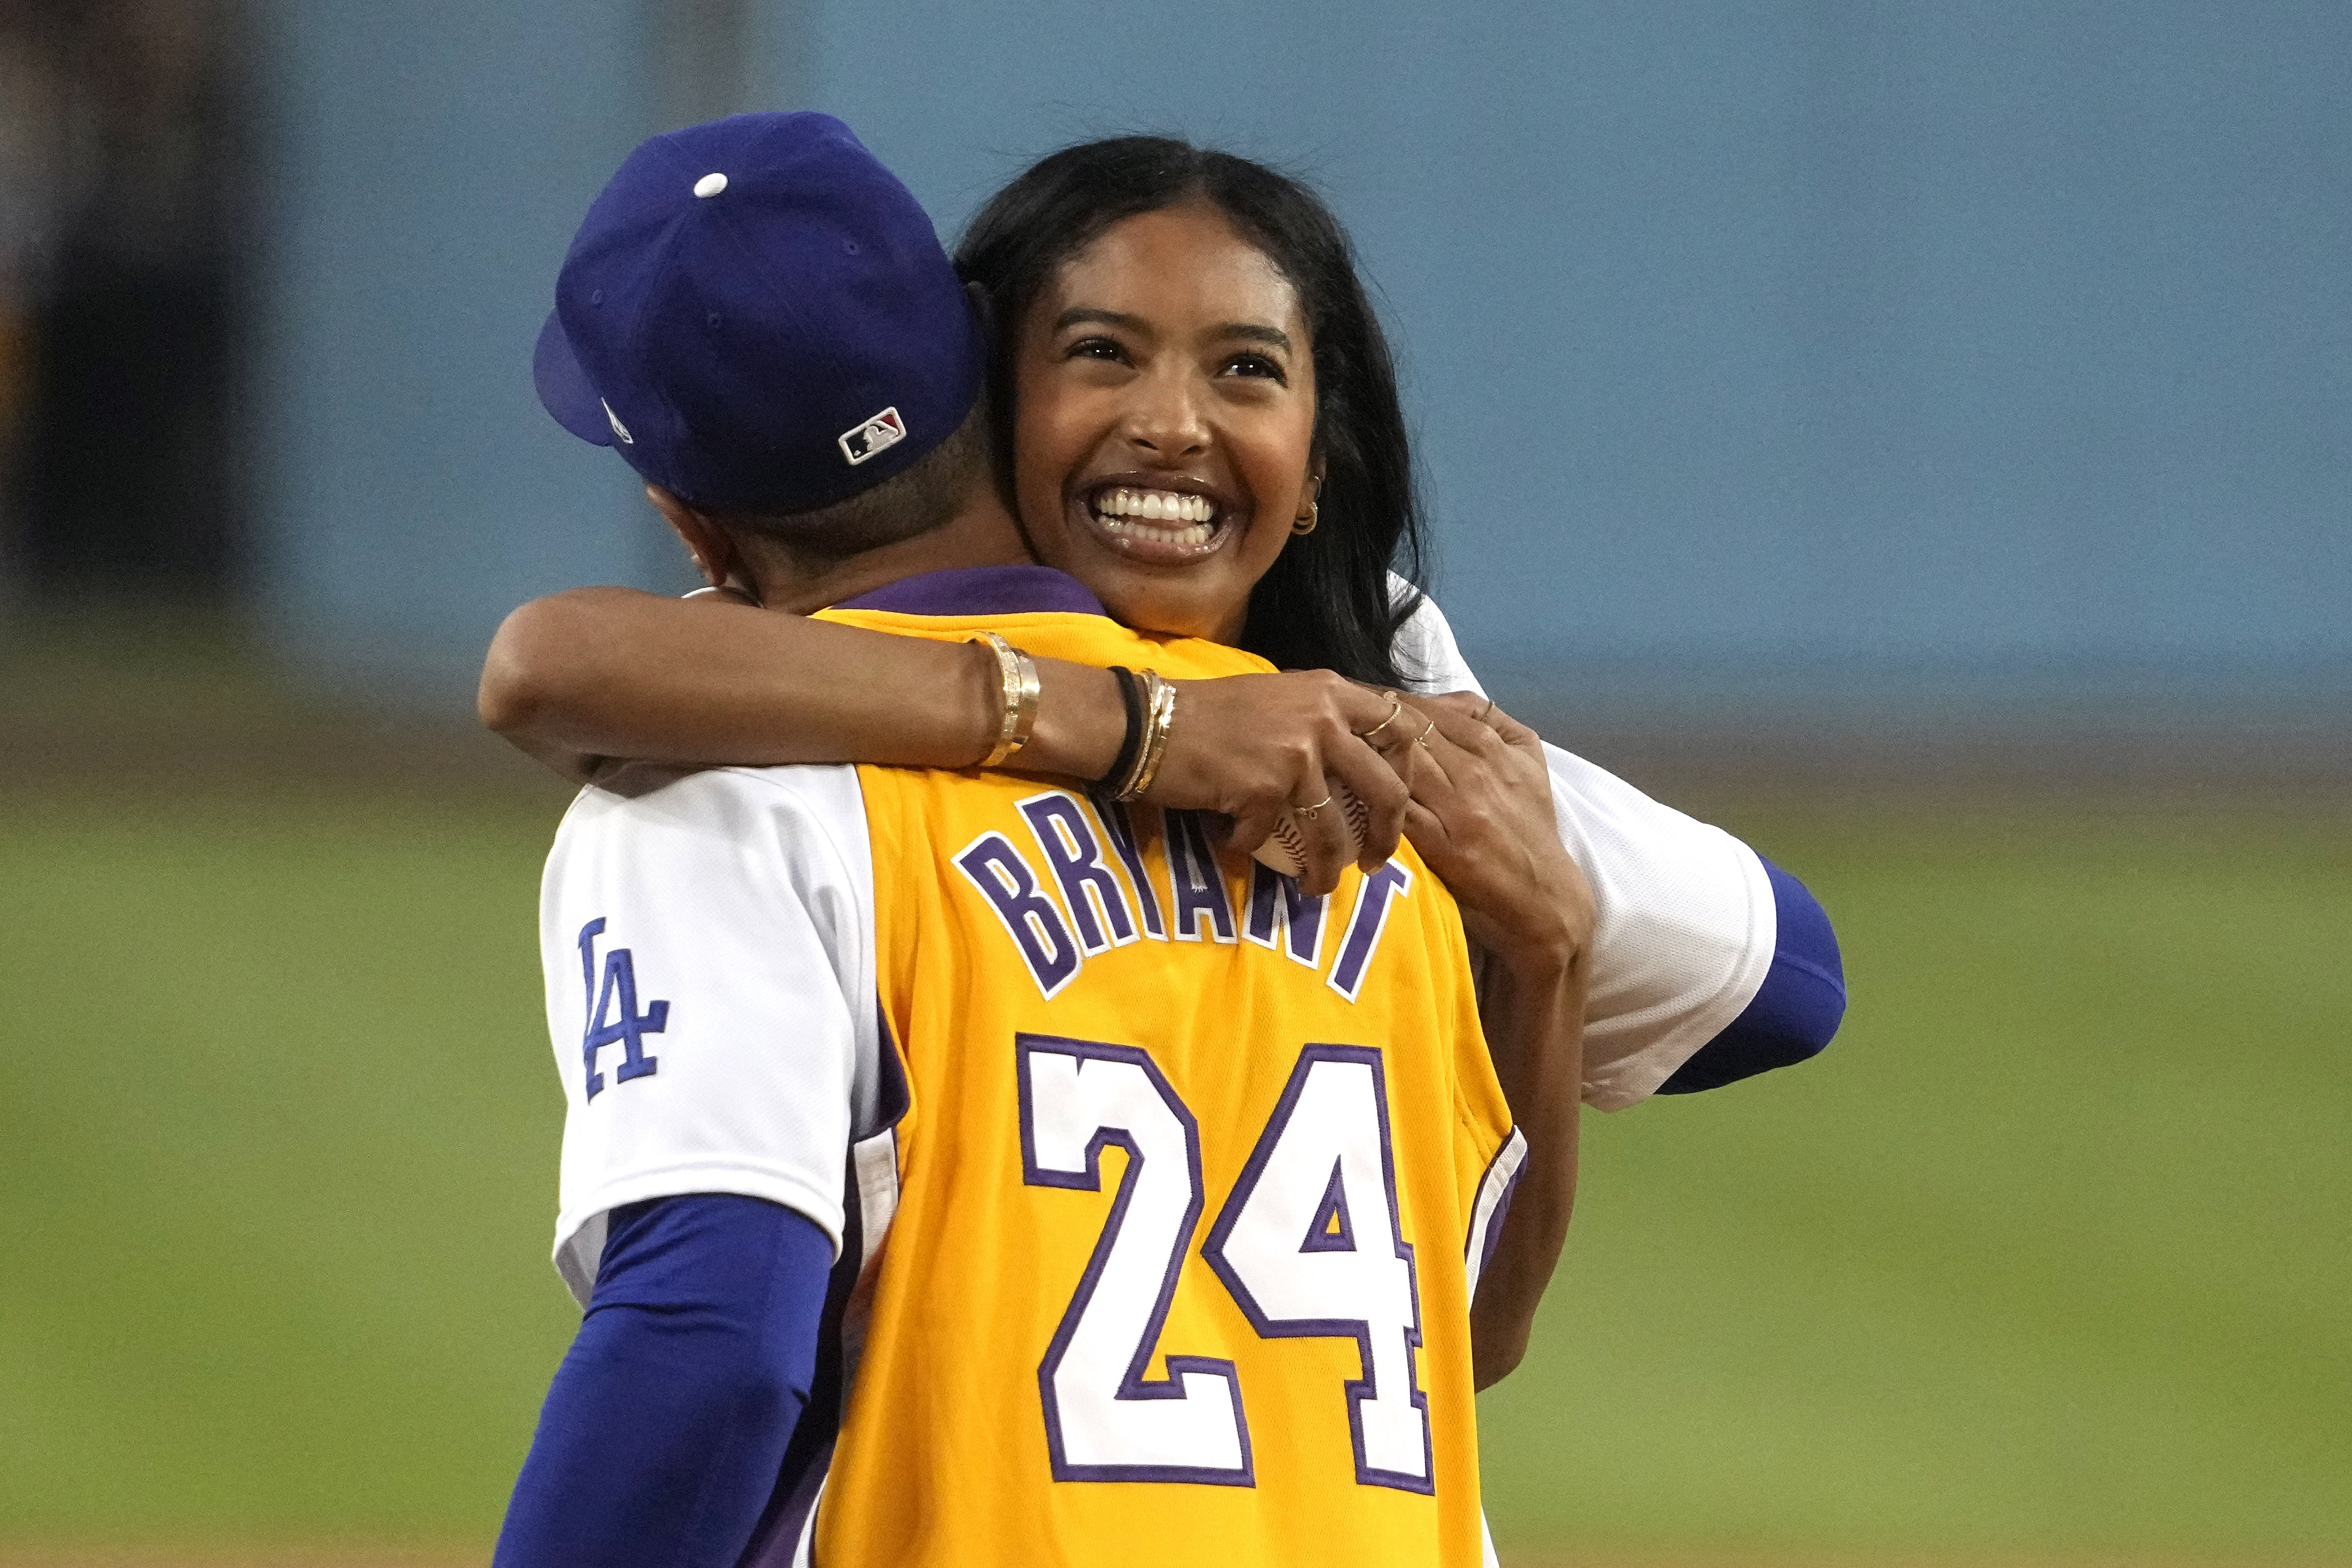 Lakers Video: Dodger Stadium Honors Kobe Bryant With Drone Show